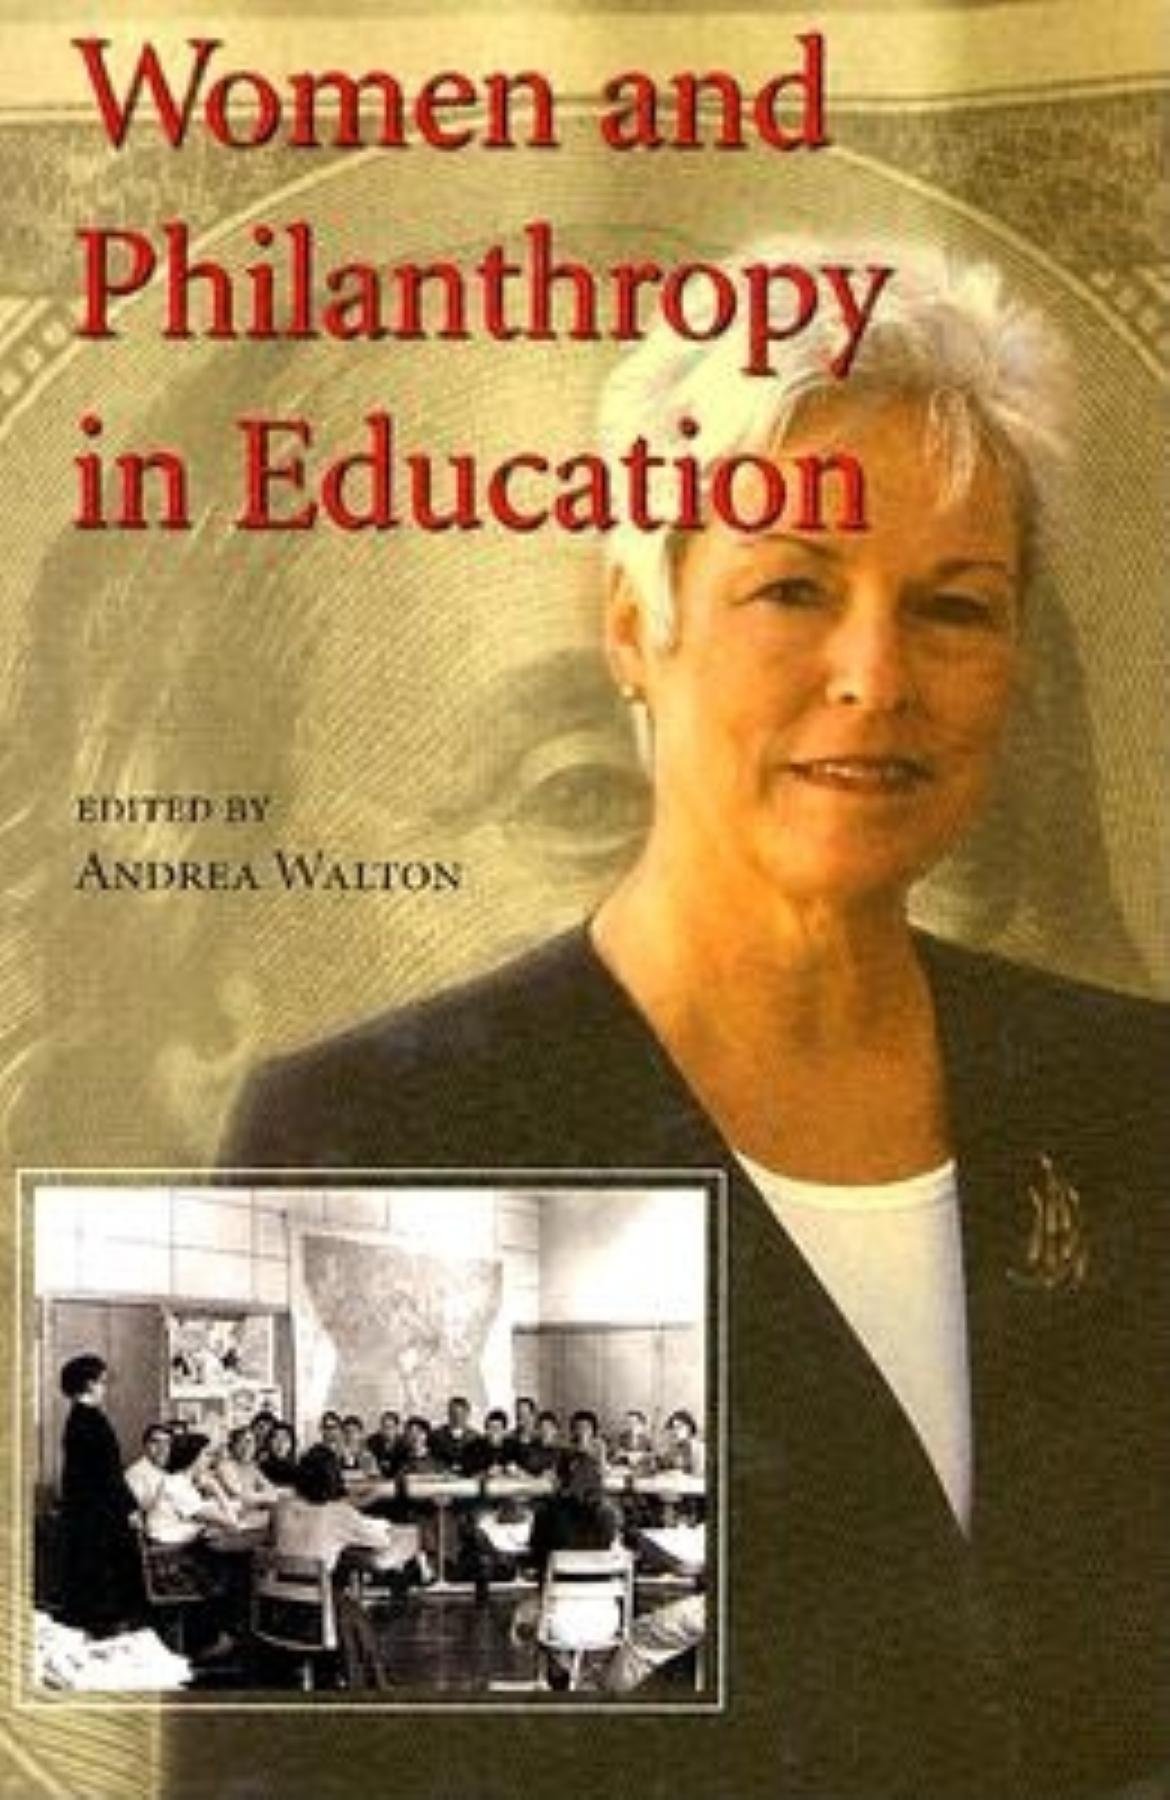 Women and Philanthropy in Education